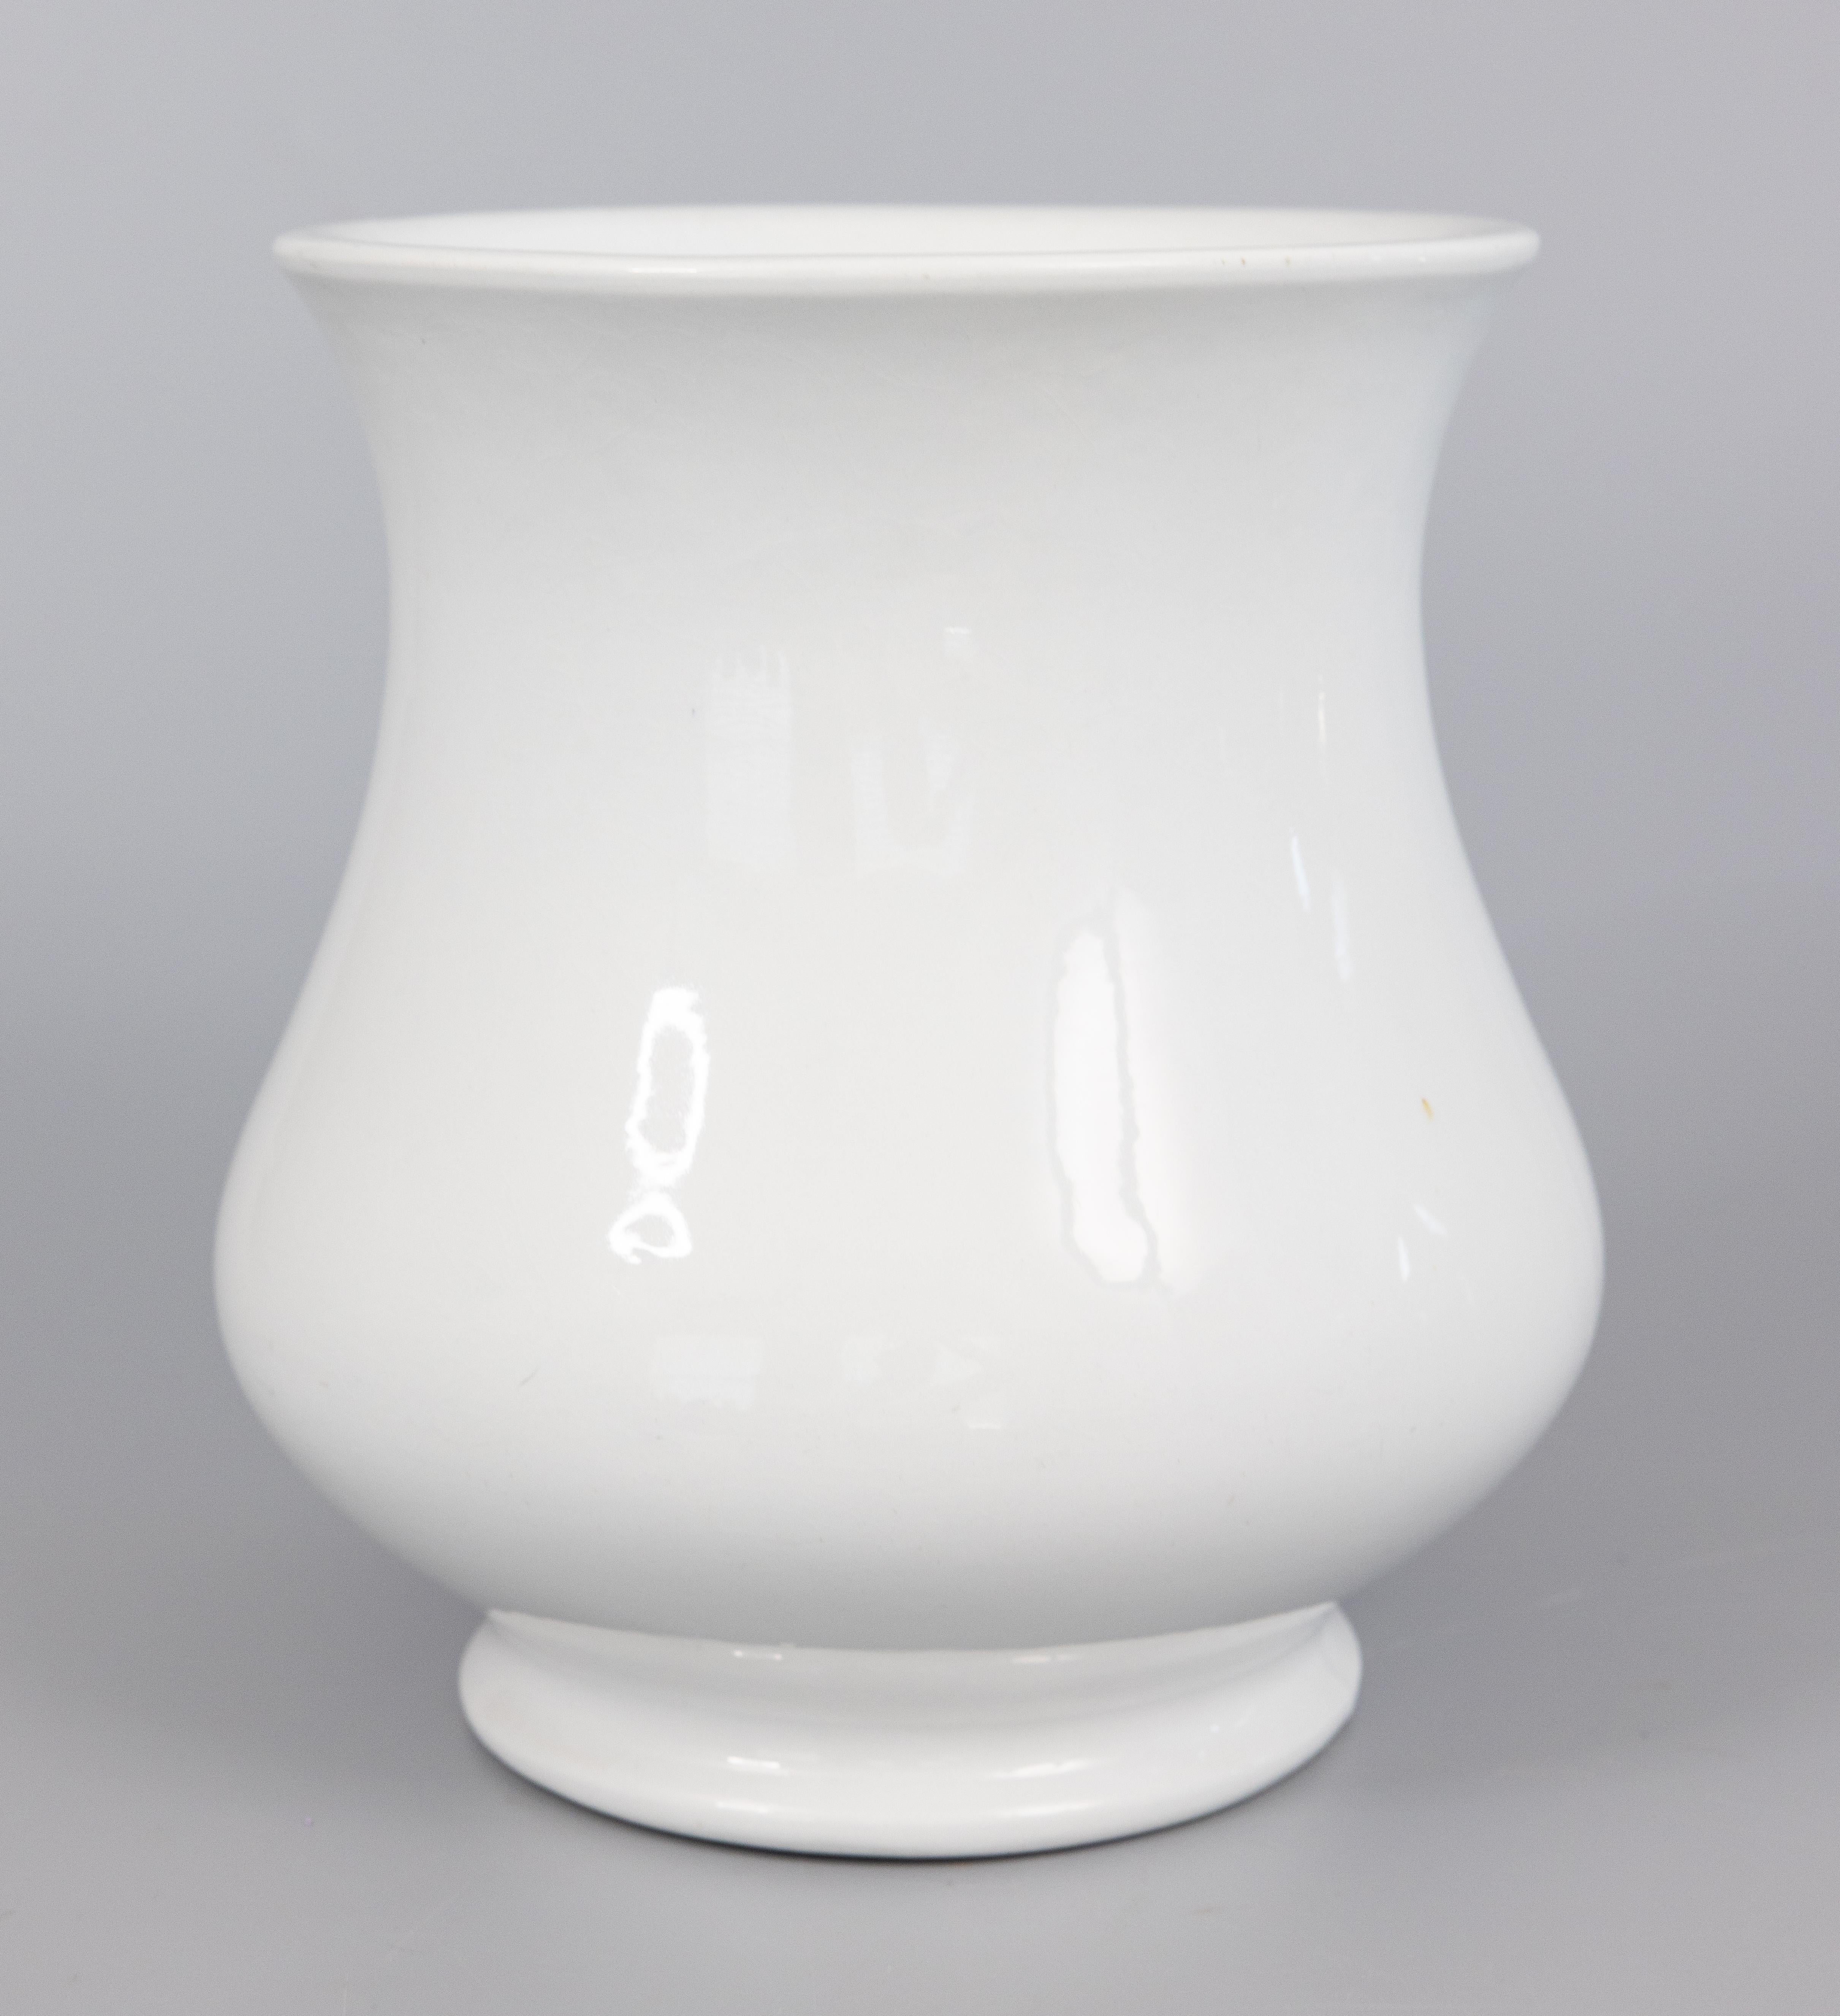 A large beautiful antique English white ironstone vase or planter by Alfred Meakin, circa 1897. Maker's mark on reverse. This fine jardiniere is a nice large size and heavy, weighing over 7 lbs. It has a lovely shape with simple clean lines, perfect